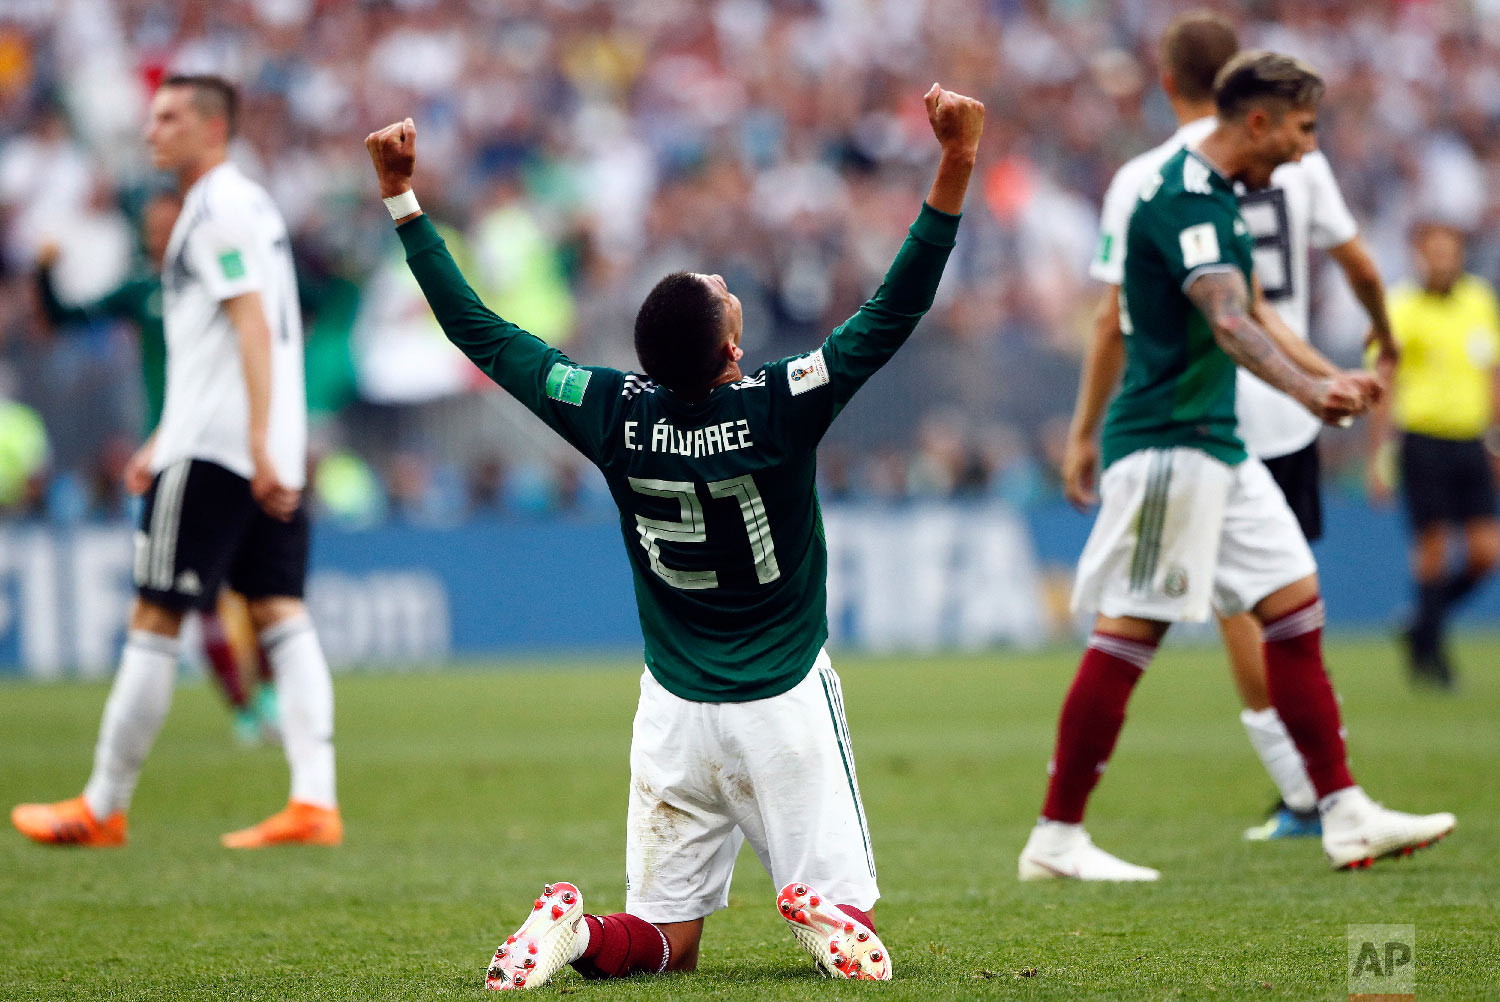  Mexico's Edson Alvarez celebrates after his team won the group F match against Germany at the 2018 soccer World Cup in the Luzhniki Stadium in Moscow, Russia, on June 17, 2018. (AP Photo/Matthias Schrader) 